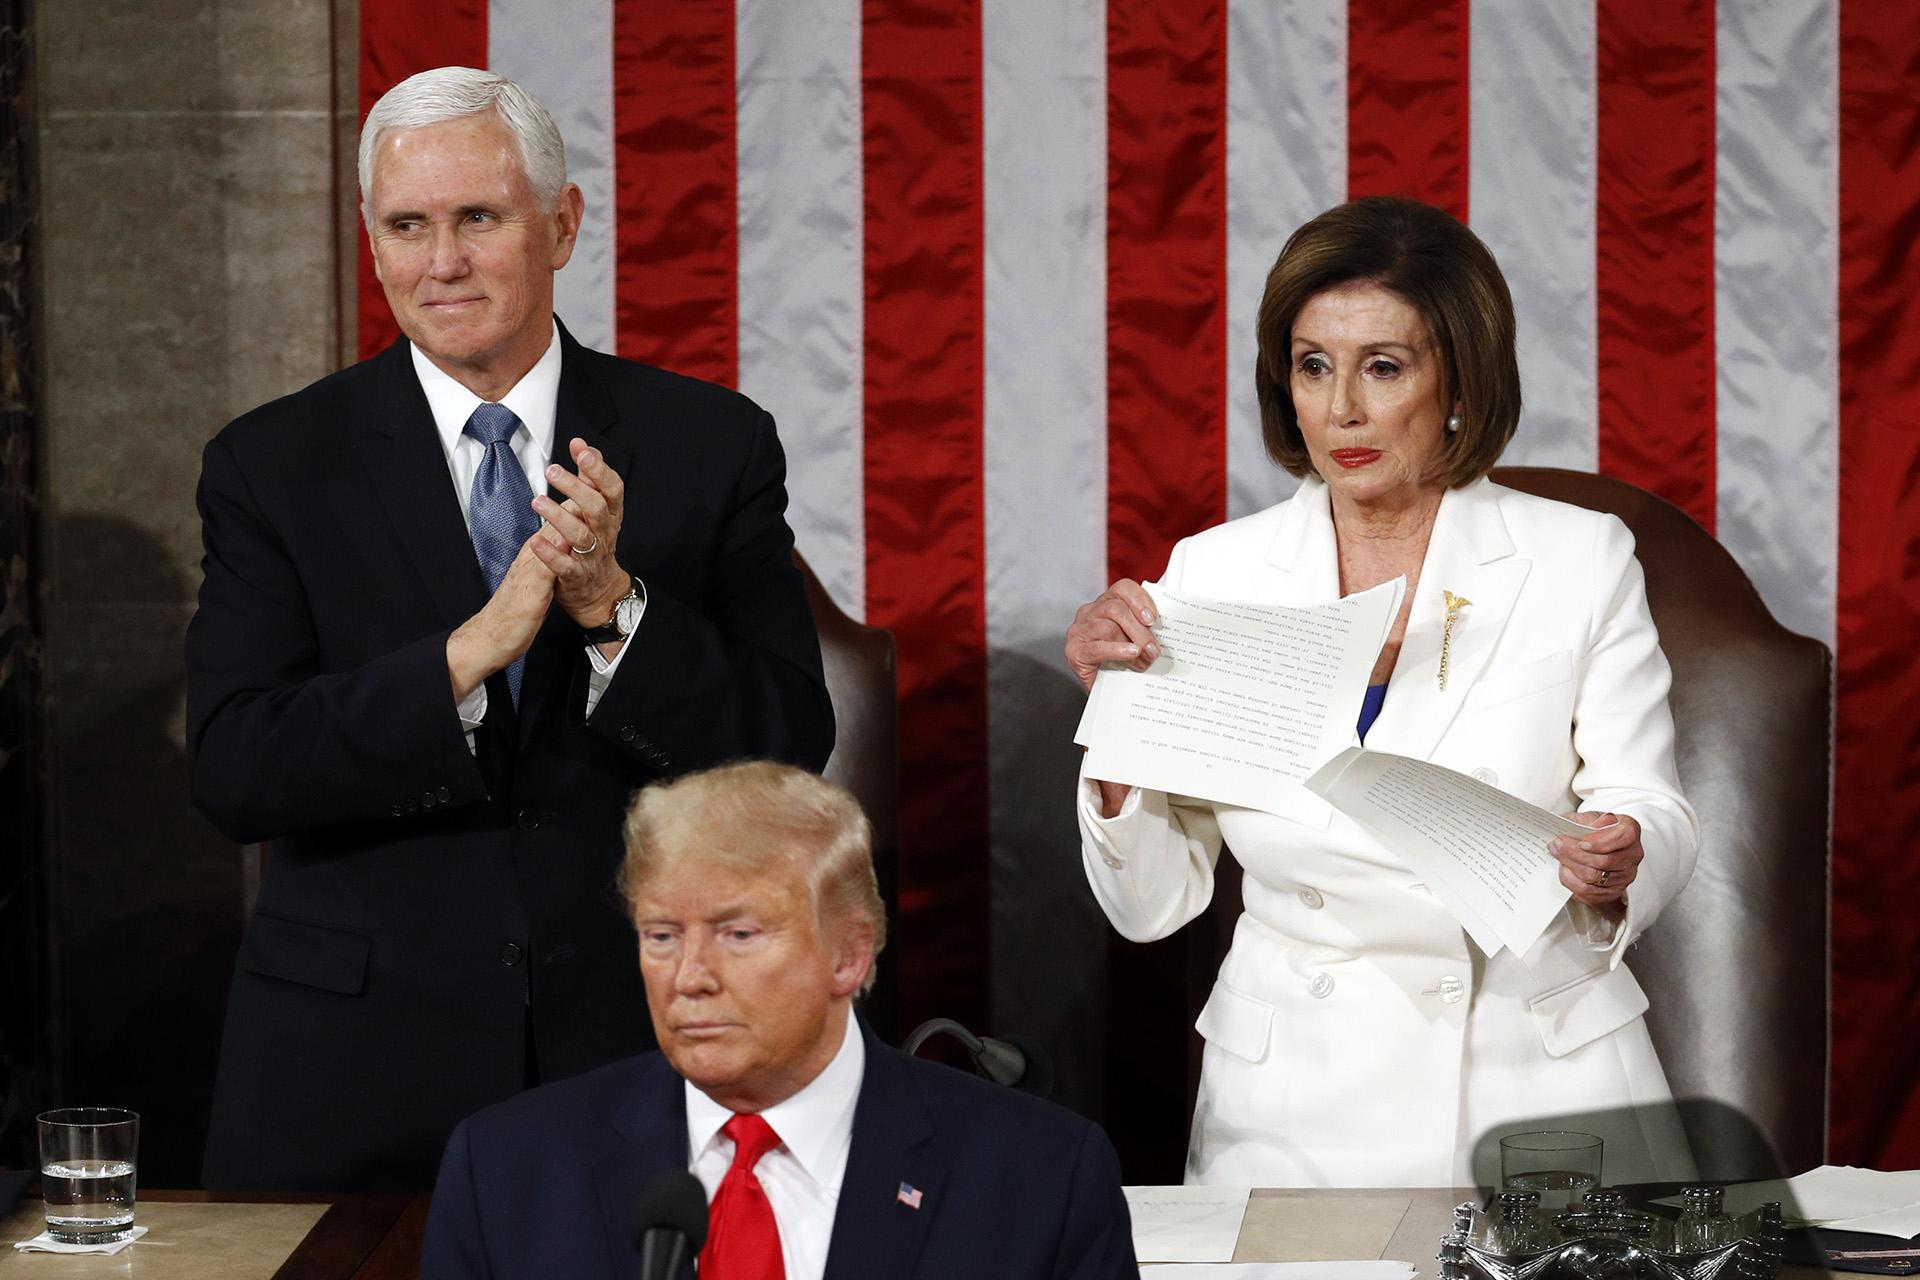 House Speaker Nancy Pelosi of Calif., tears her copy of President Donald Trump’s State of the Union address after he delivered it to a joint session of Congress on Capitol Hill in Washington, Tuesday, Feb. 4, 2020. Vice President Mike Pence is at left. (AP Photo / Patrick Semansky)